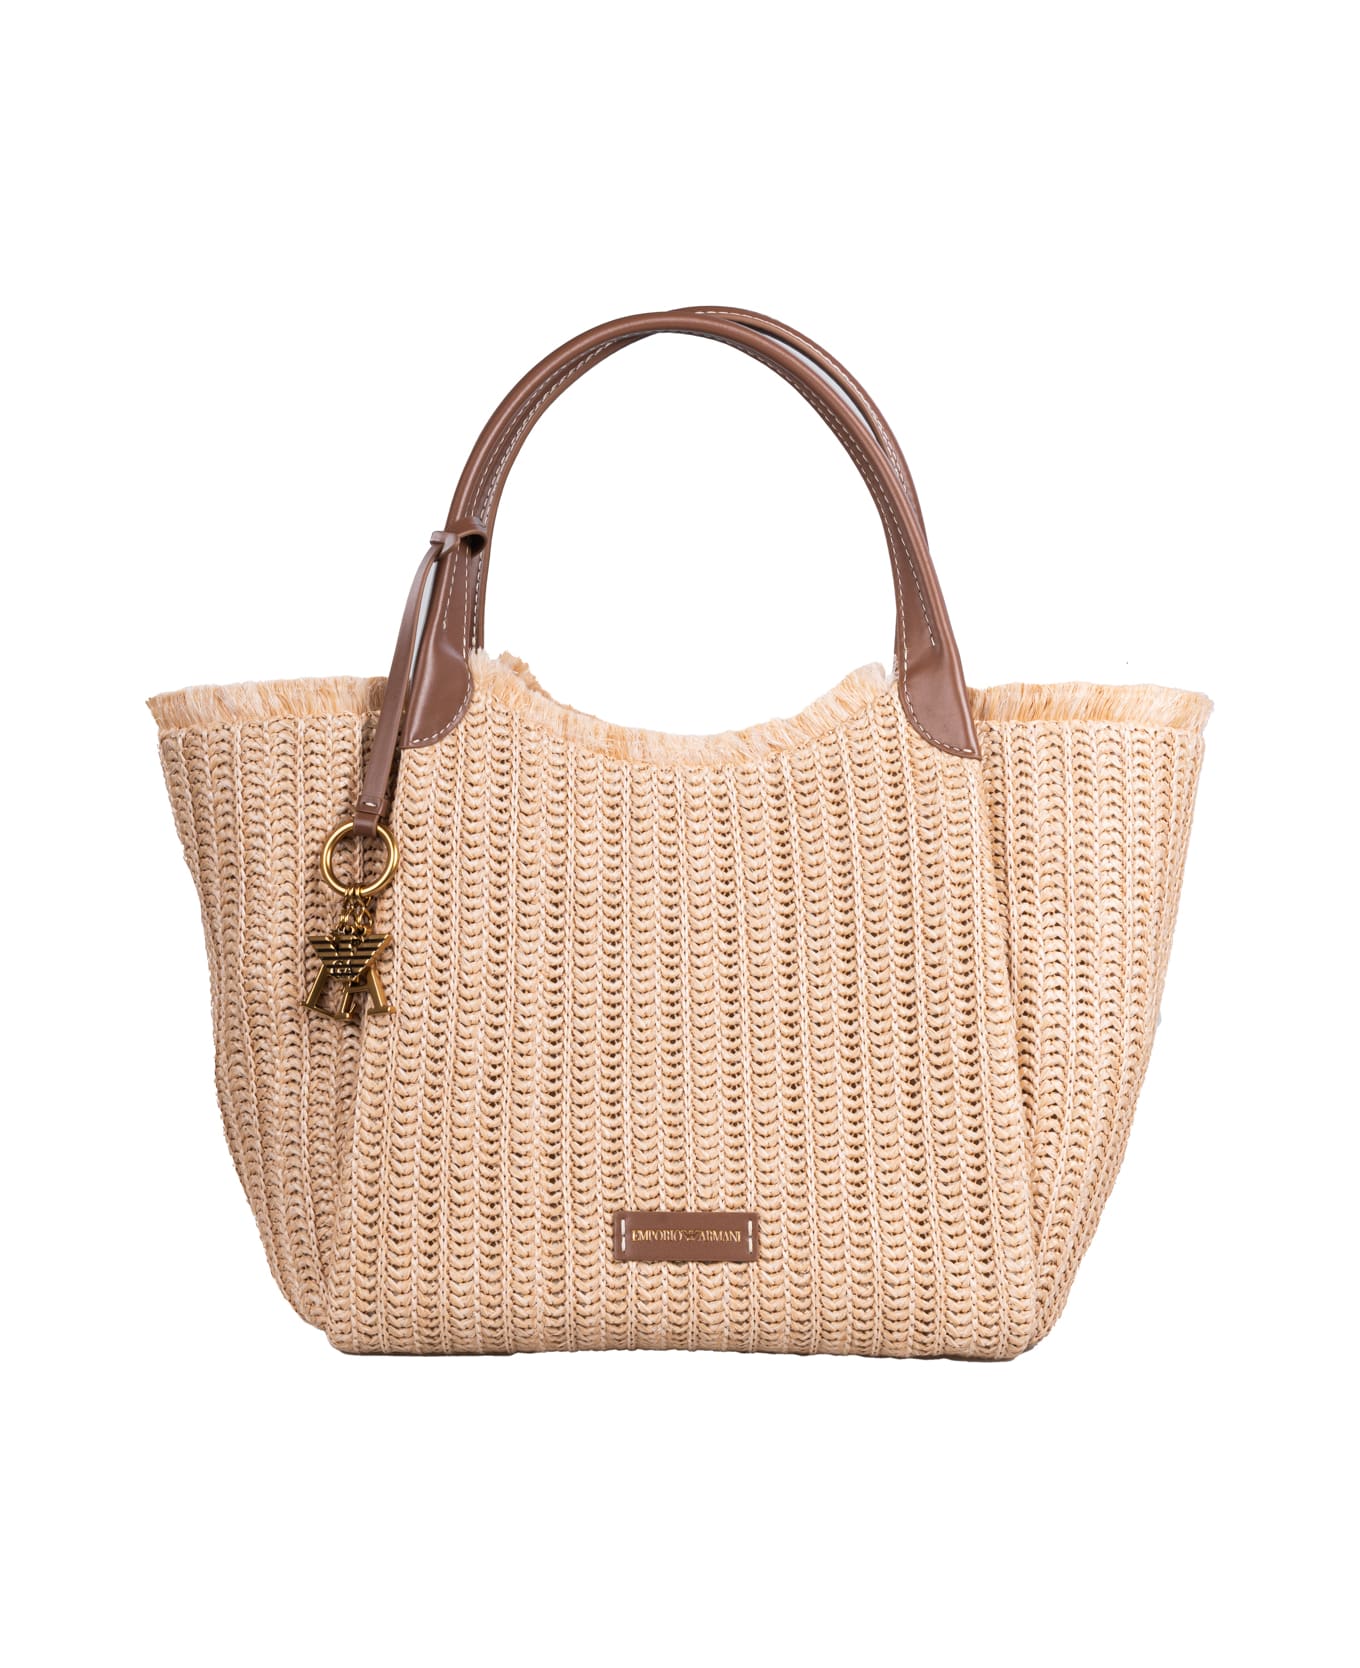 Emporio Armani Bags.. Beige - Natural トートバッグ